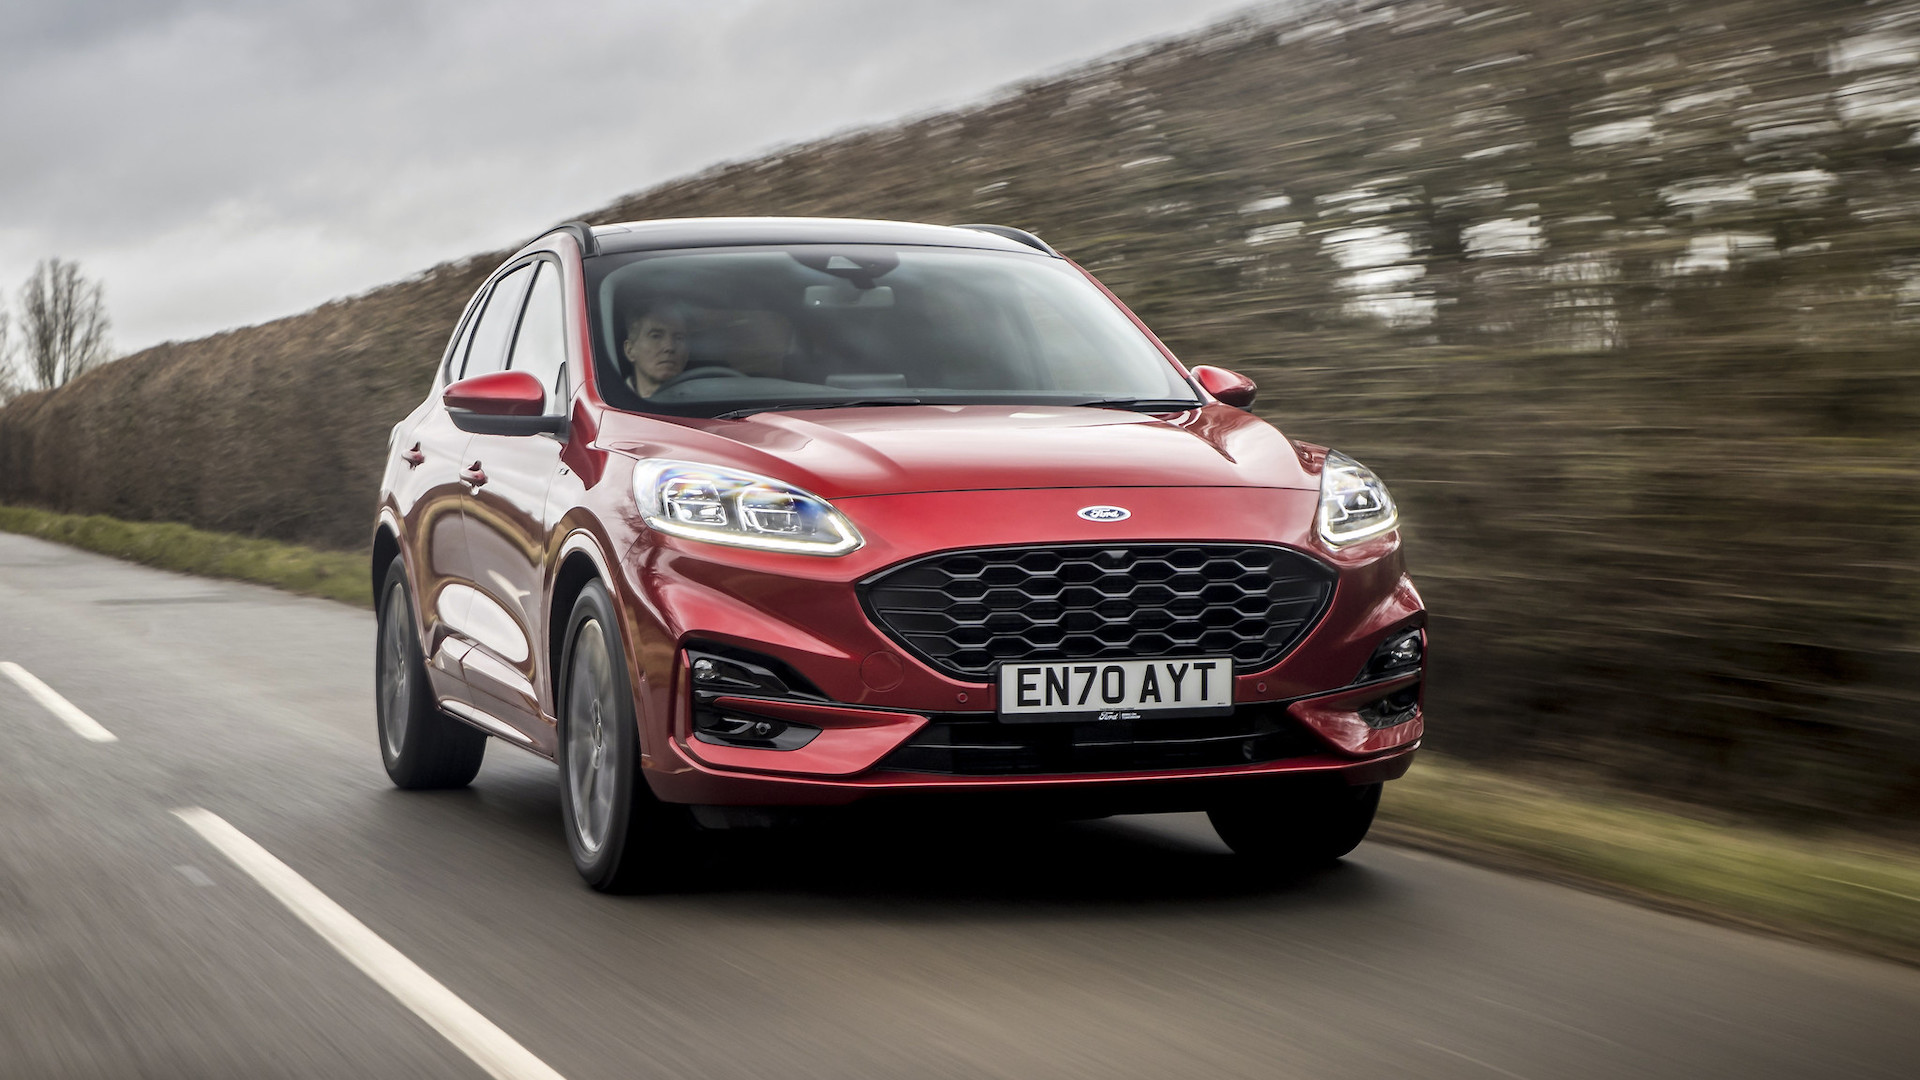 Used Ford Kuga (Mk3, 2020-date) review